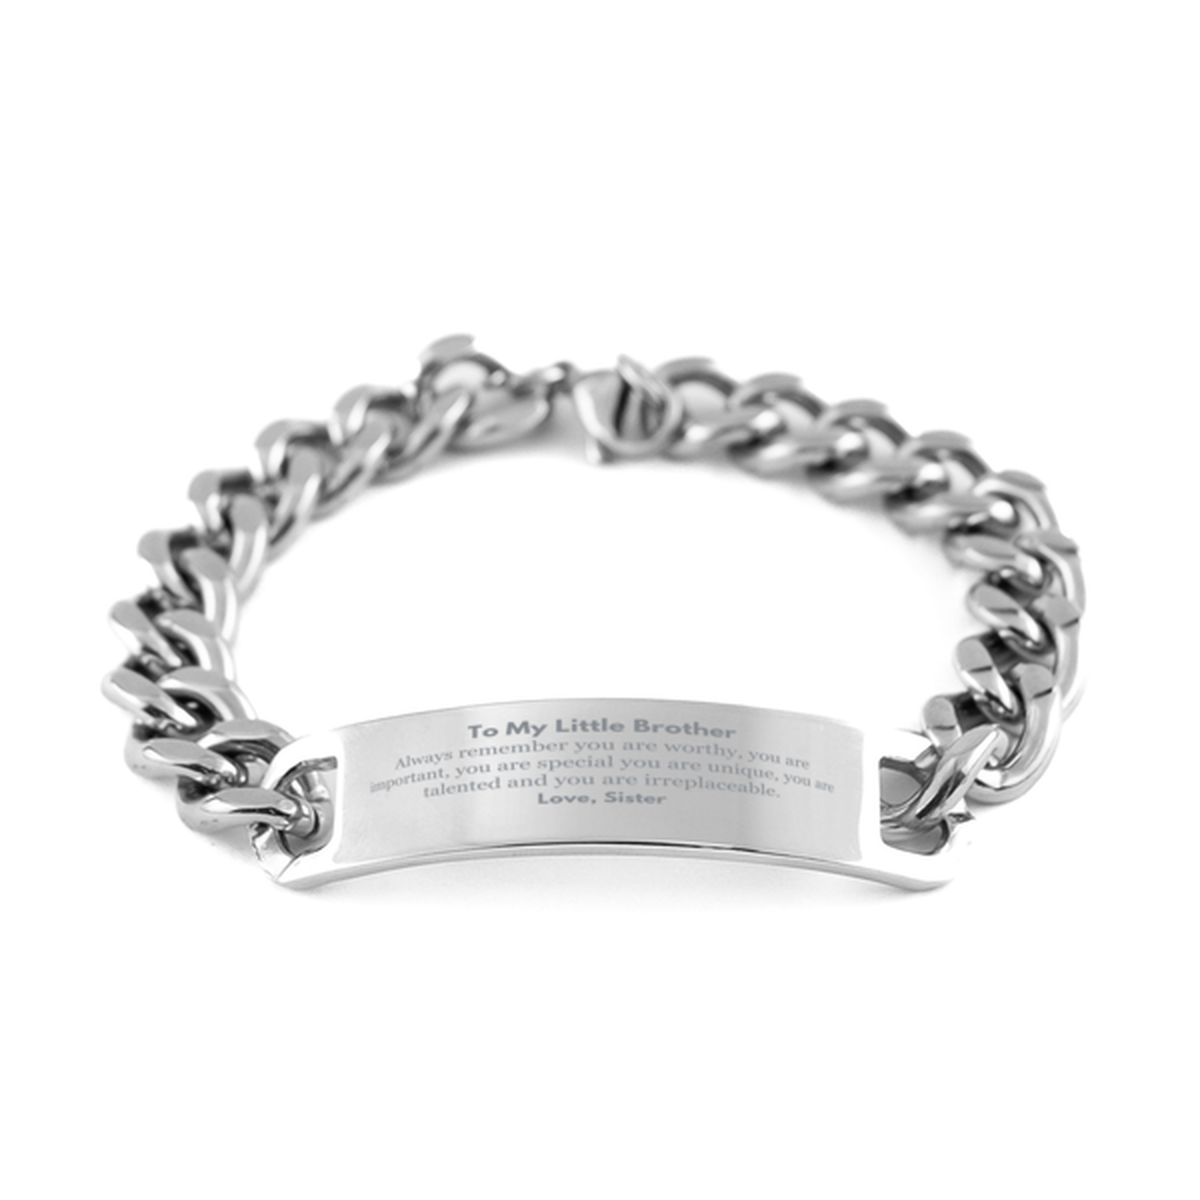 Little Brother Birthday Gifts from Sister, Inspirational Cuban Chain Stainless Steel Bracelet for Little Brother Christmas Graduation Gifts for Little Brother Always remember you are worthy, you are important. Love, Sister